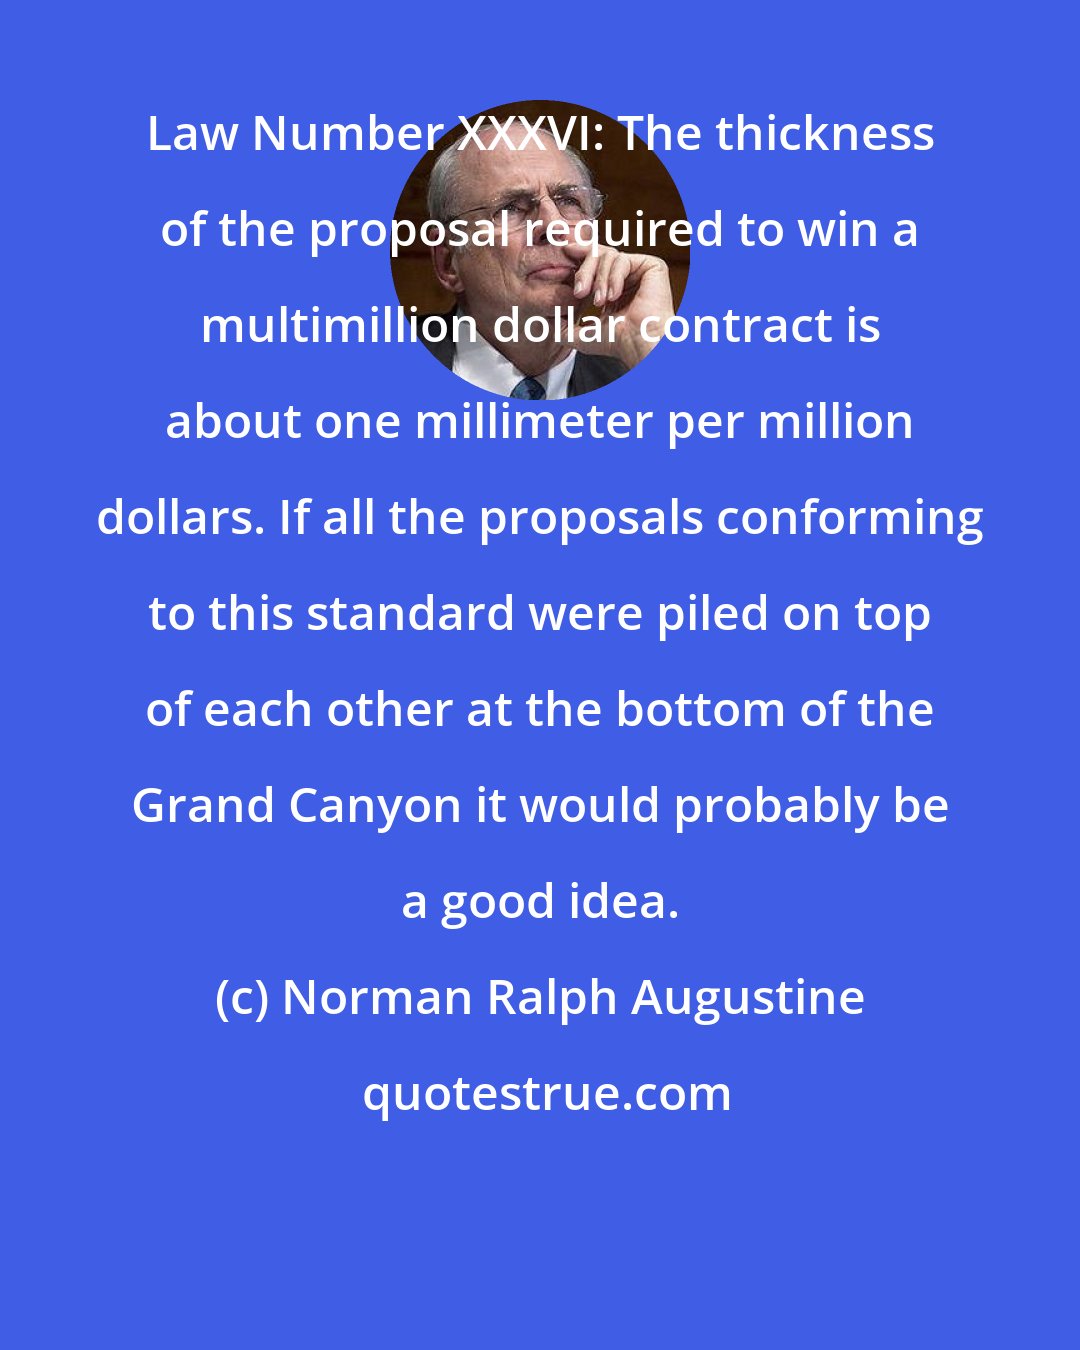 Norman Ralph Augustine: Law Number XXXVI: The thickness of the proposal required to win a multimillion dollar contract is about one millimeter per million dollars. If all the proposals conforming to this standard were piled on top of each other at the bottom of the Grand Canyon it would probably be a good idea.